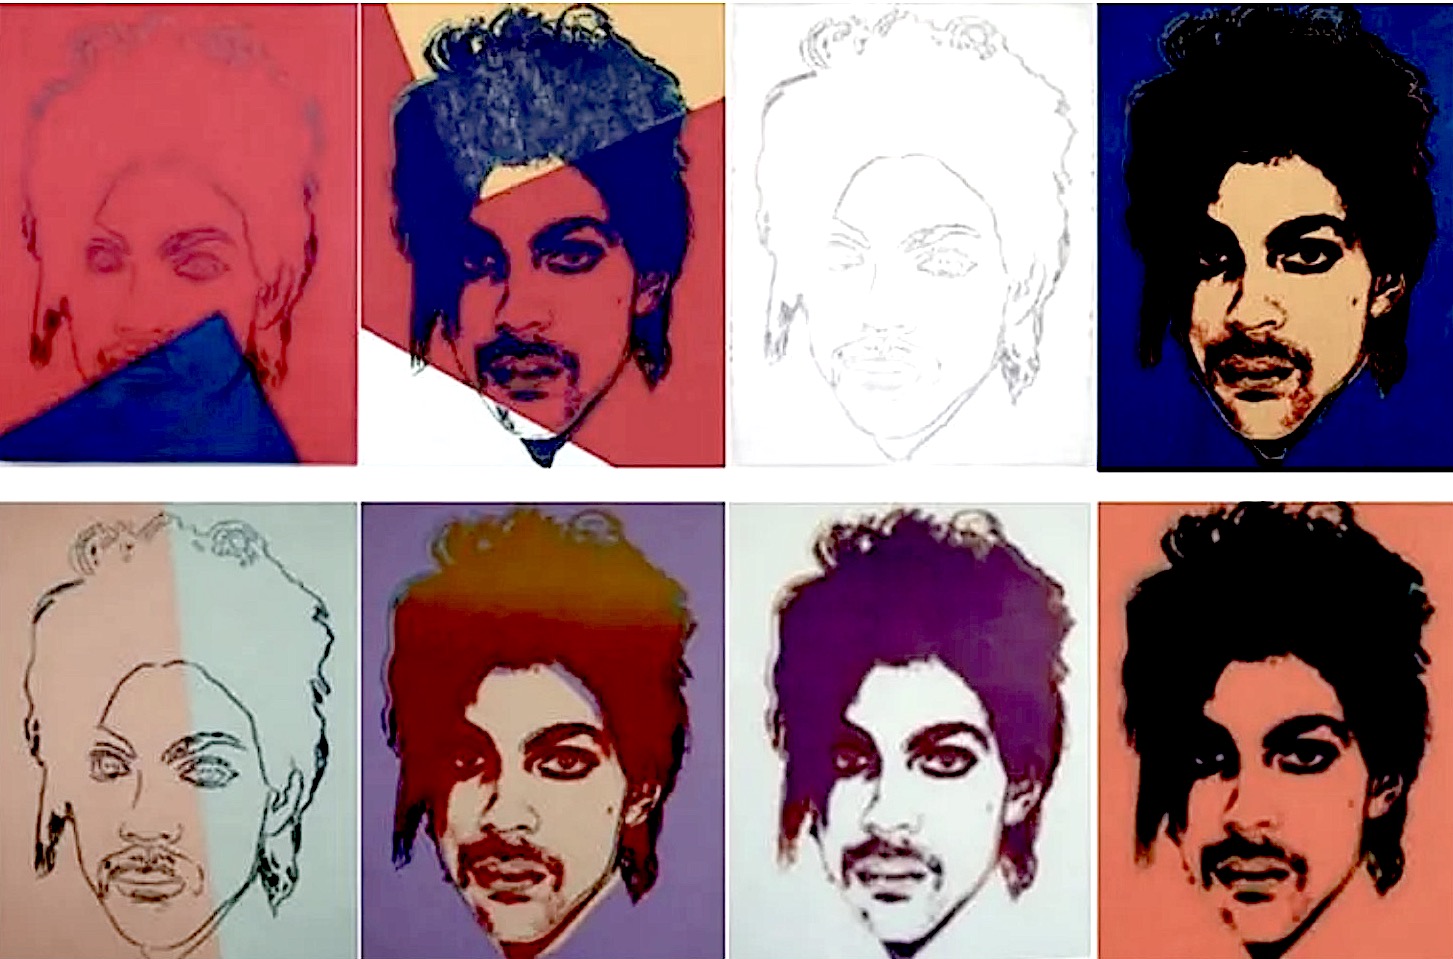 Andy Warhol's 1984 Prince series Supreme Court of the United States